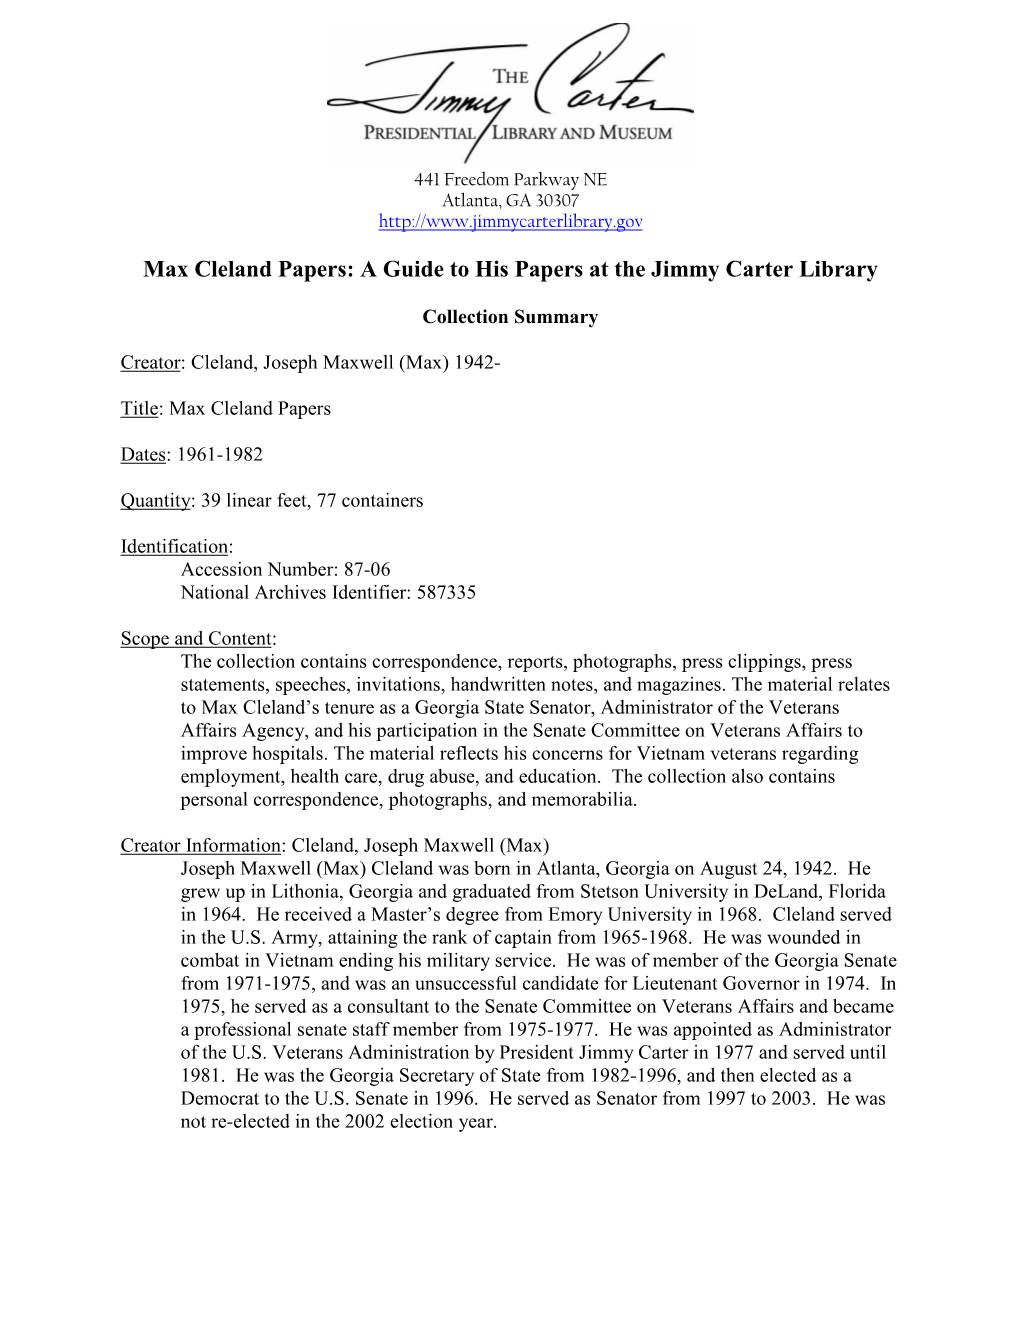 Max Cleland Papers: a Guide to His Papers at the Jimmy Carter Library